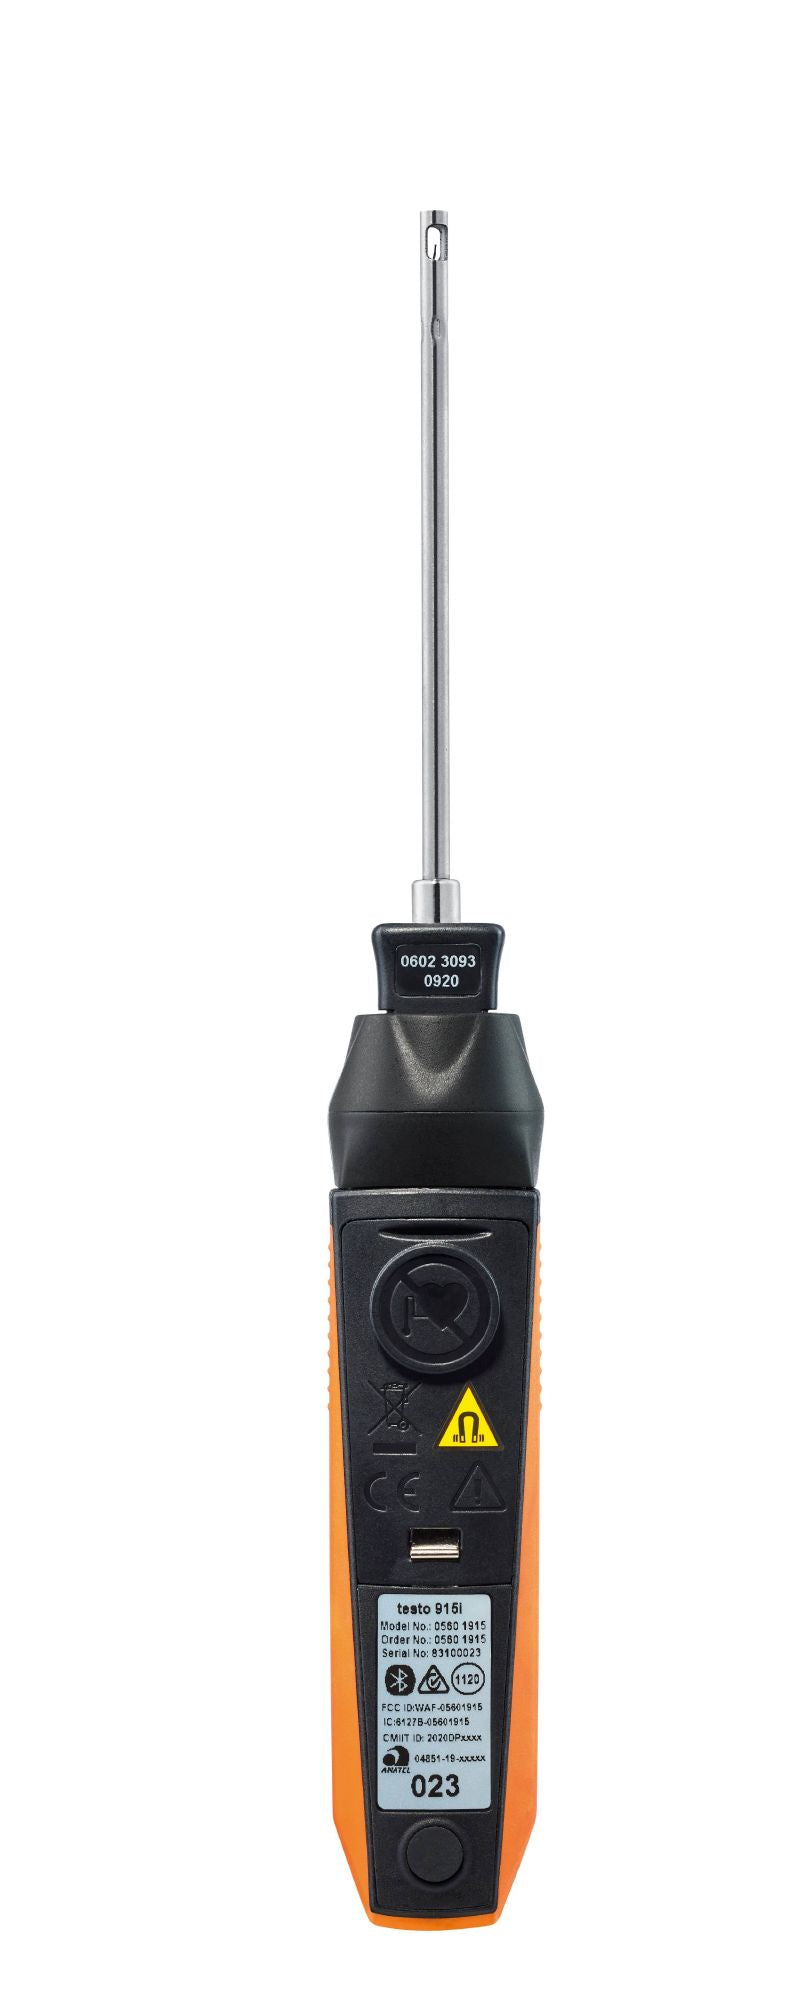 Testo 915i - Thermometer With Air Probe And Smartphone Operation